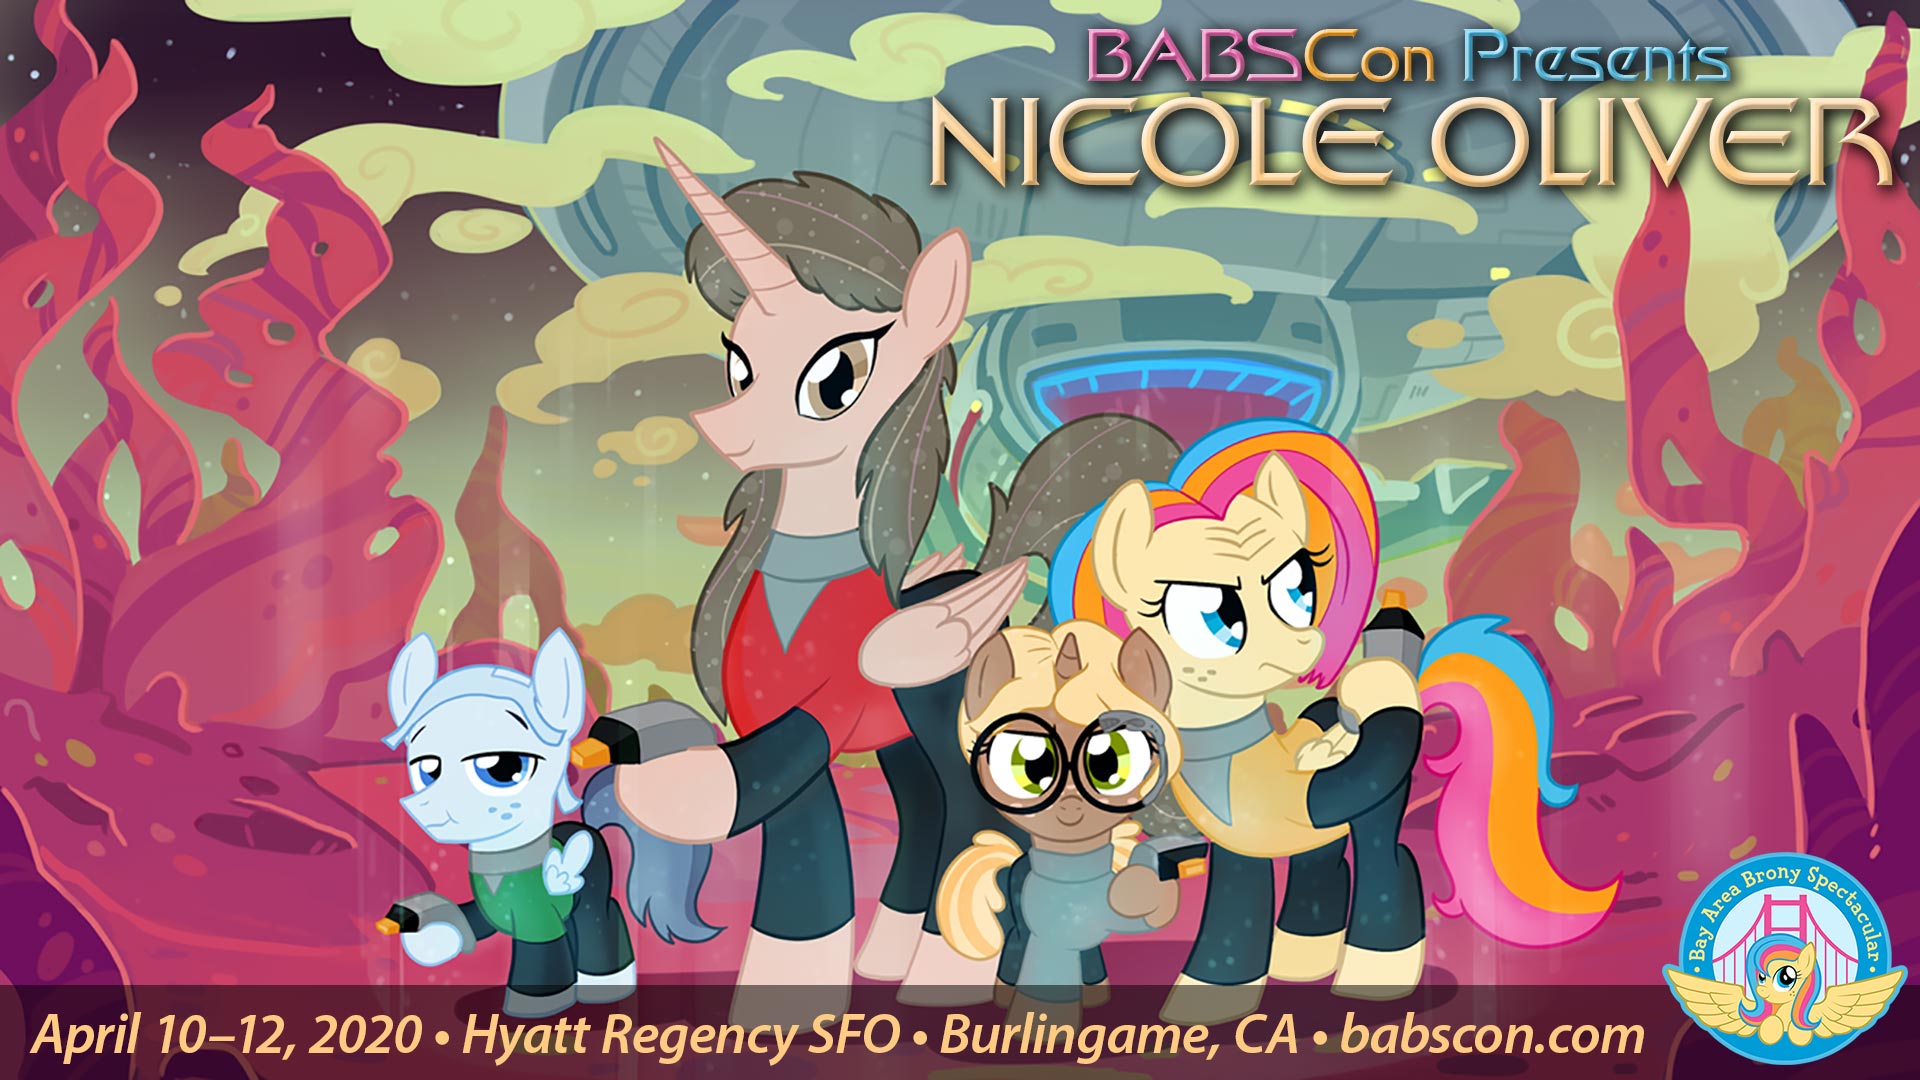 BABSCon 2020 Gets Celestial with Nicole Oliver!